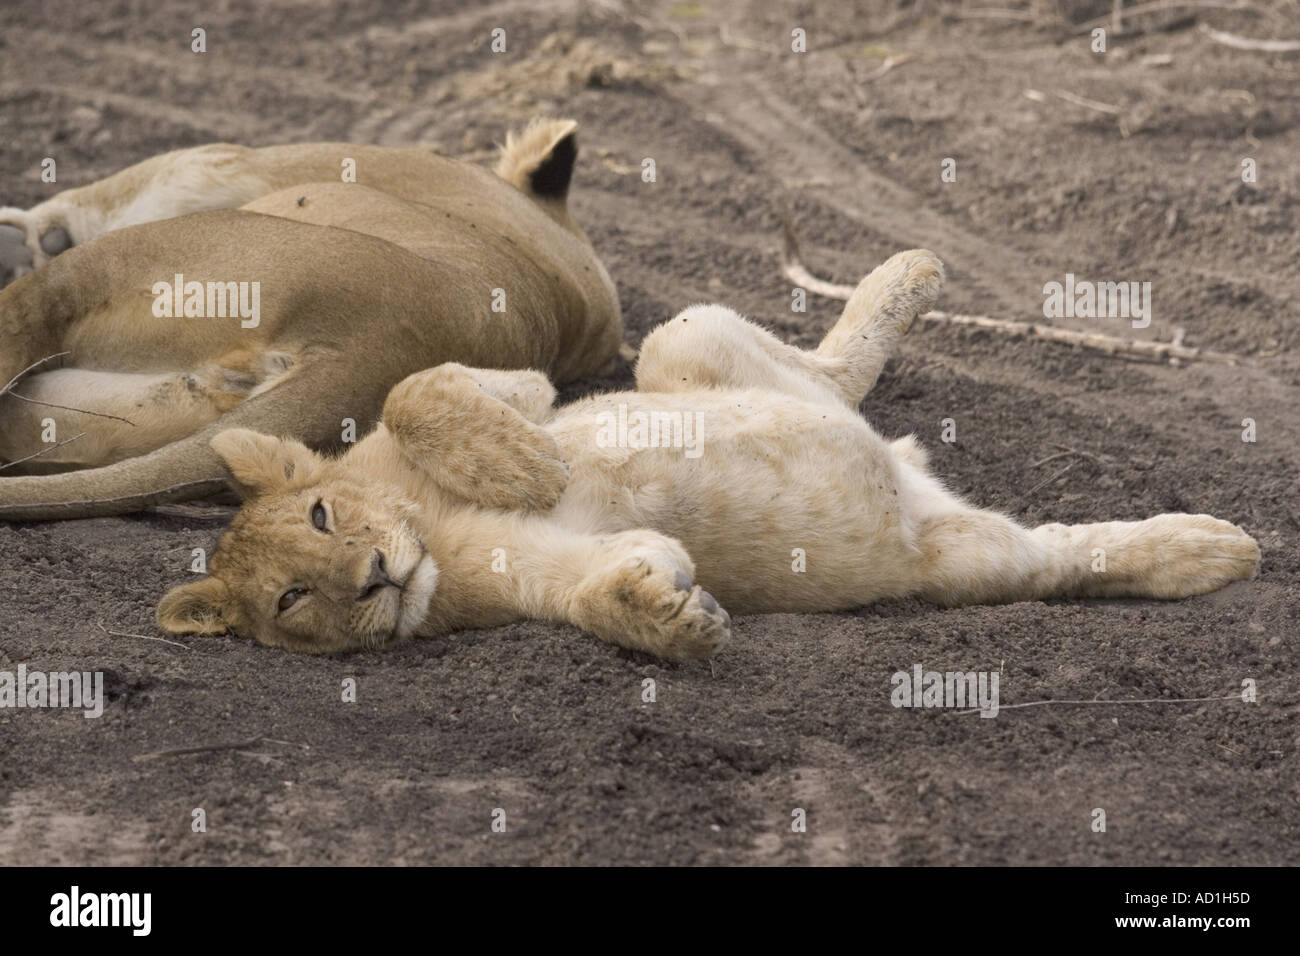 Lion cub relaxing PANTHERA LEO King of beasts Stock Photo